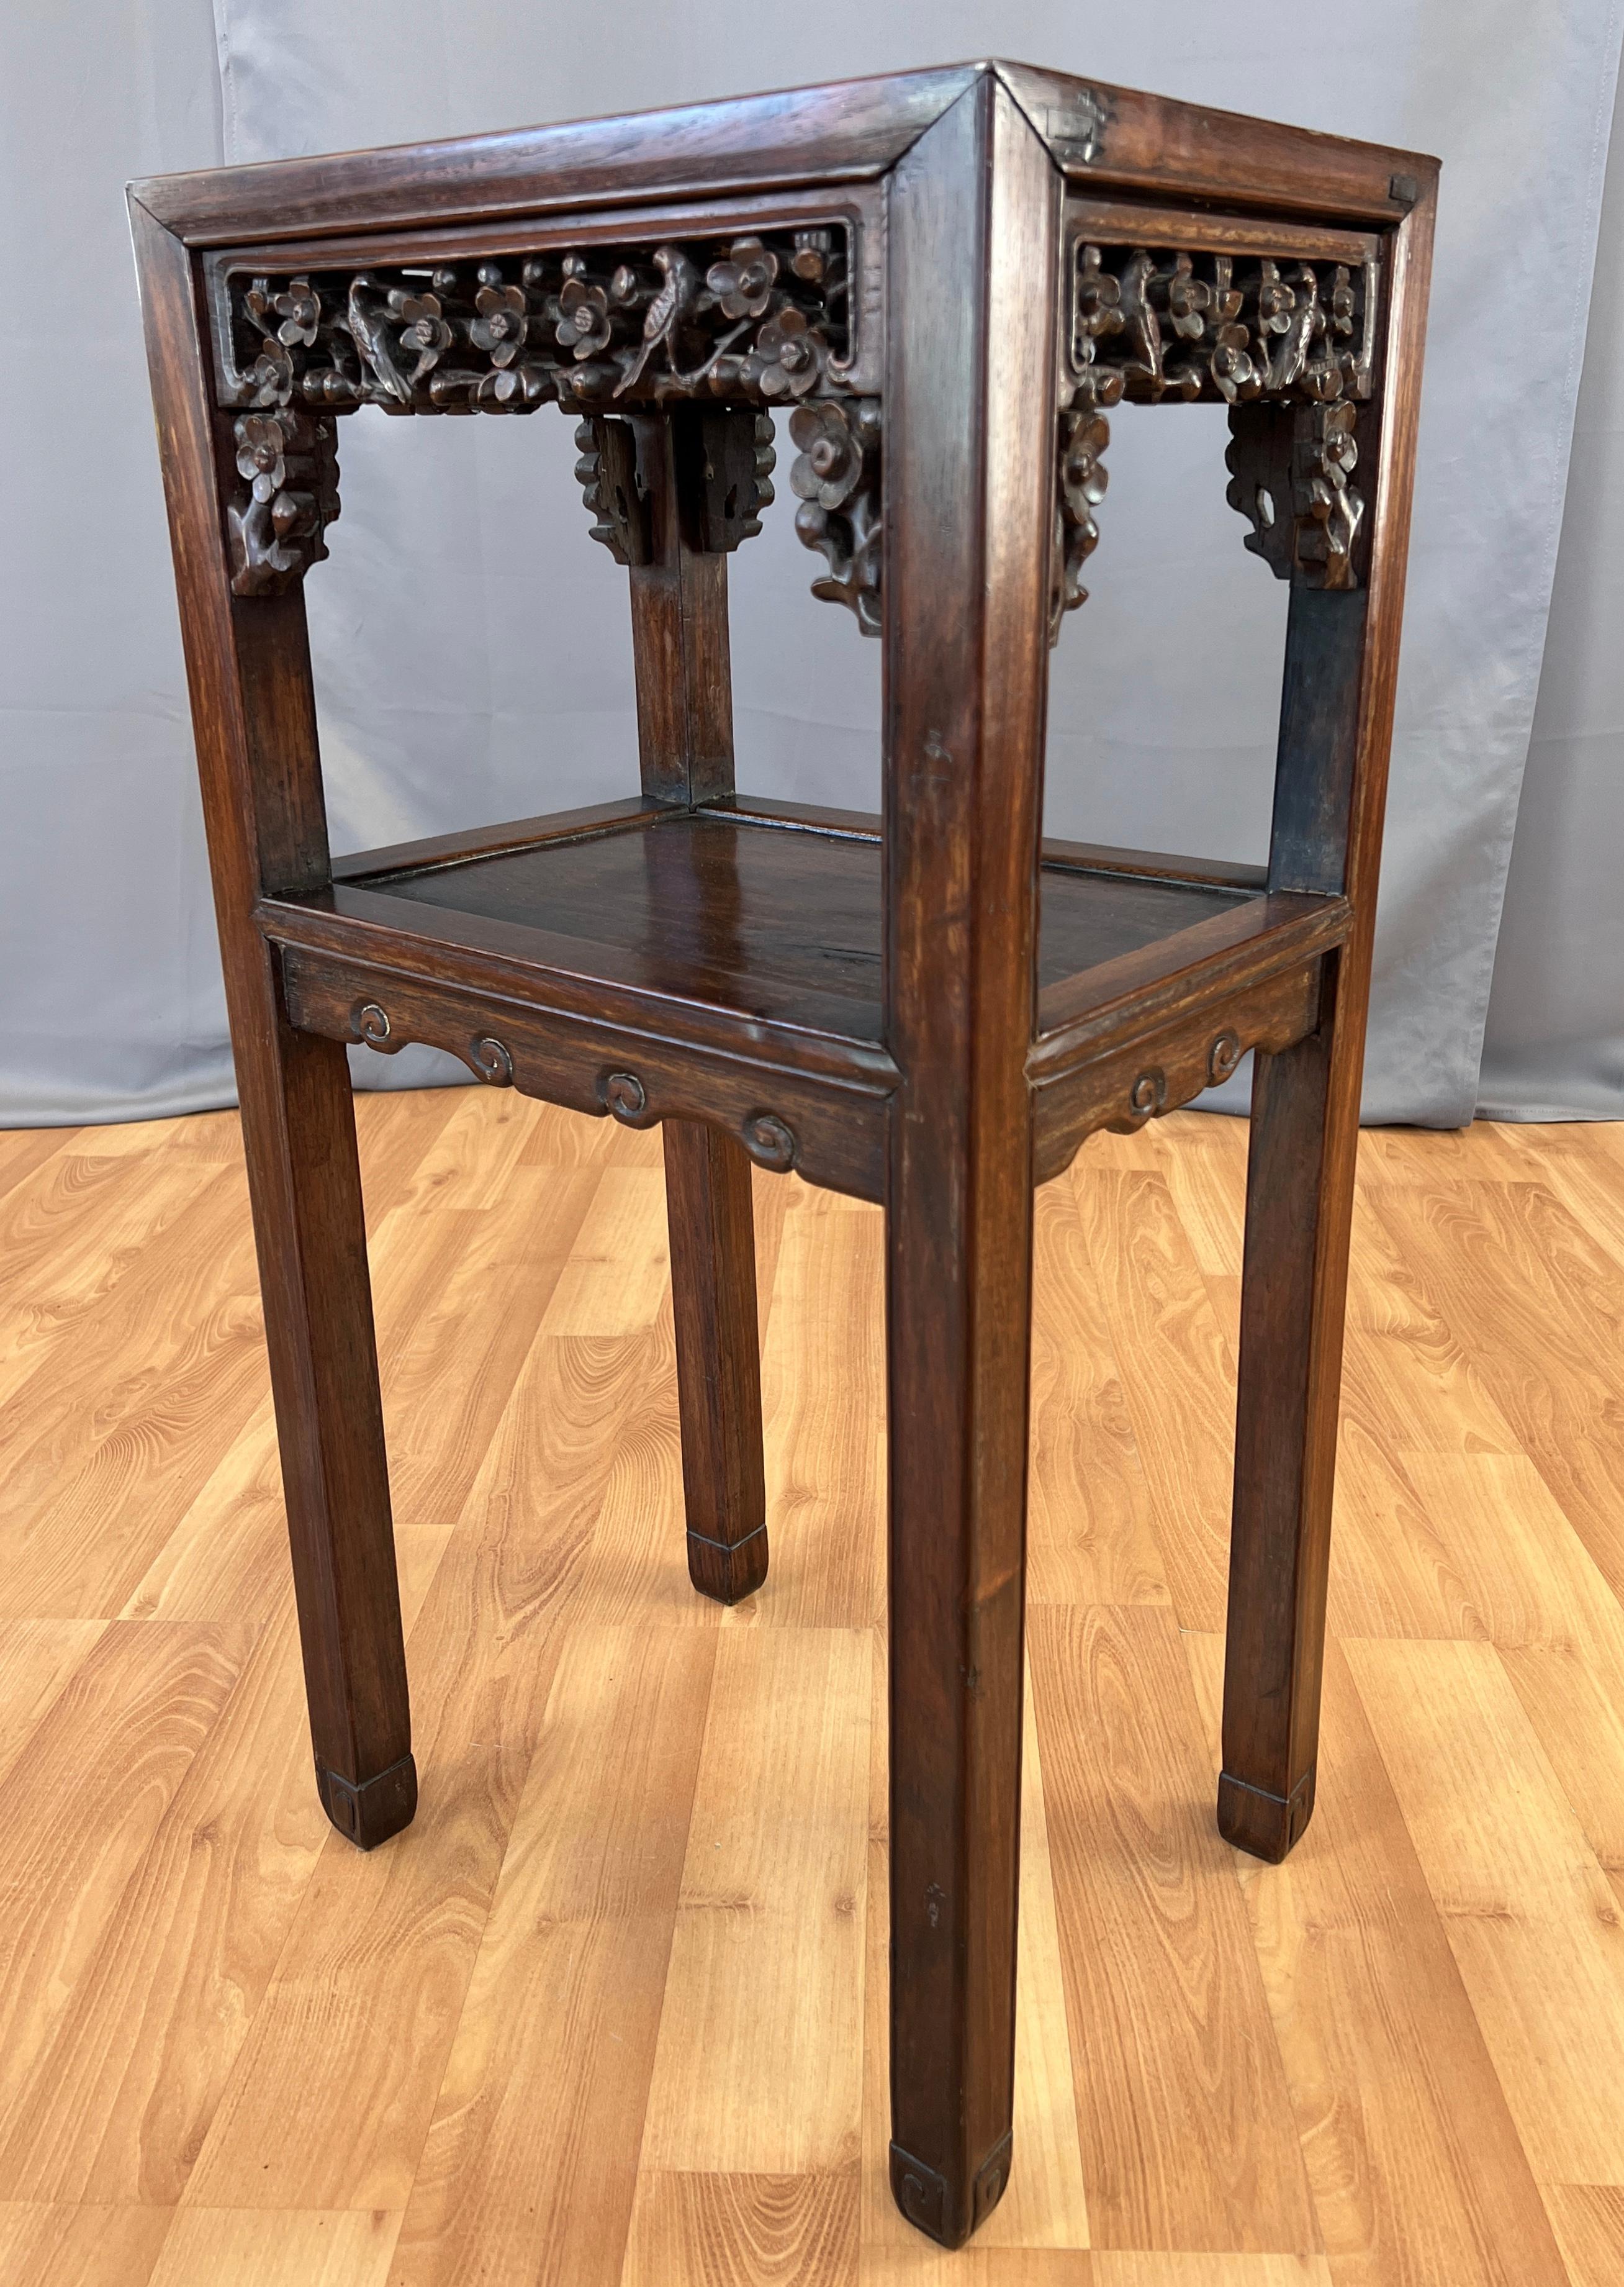 Offered here is a wonderful 19th century Chinese Zitan wood tall end table, with intricate hand carved relief on it's apron, with a shelf that has a simple carved apron.